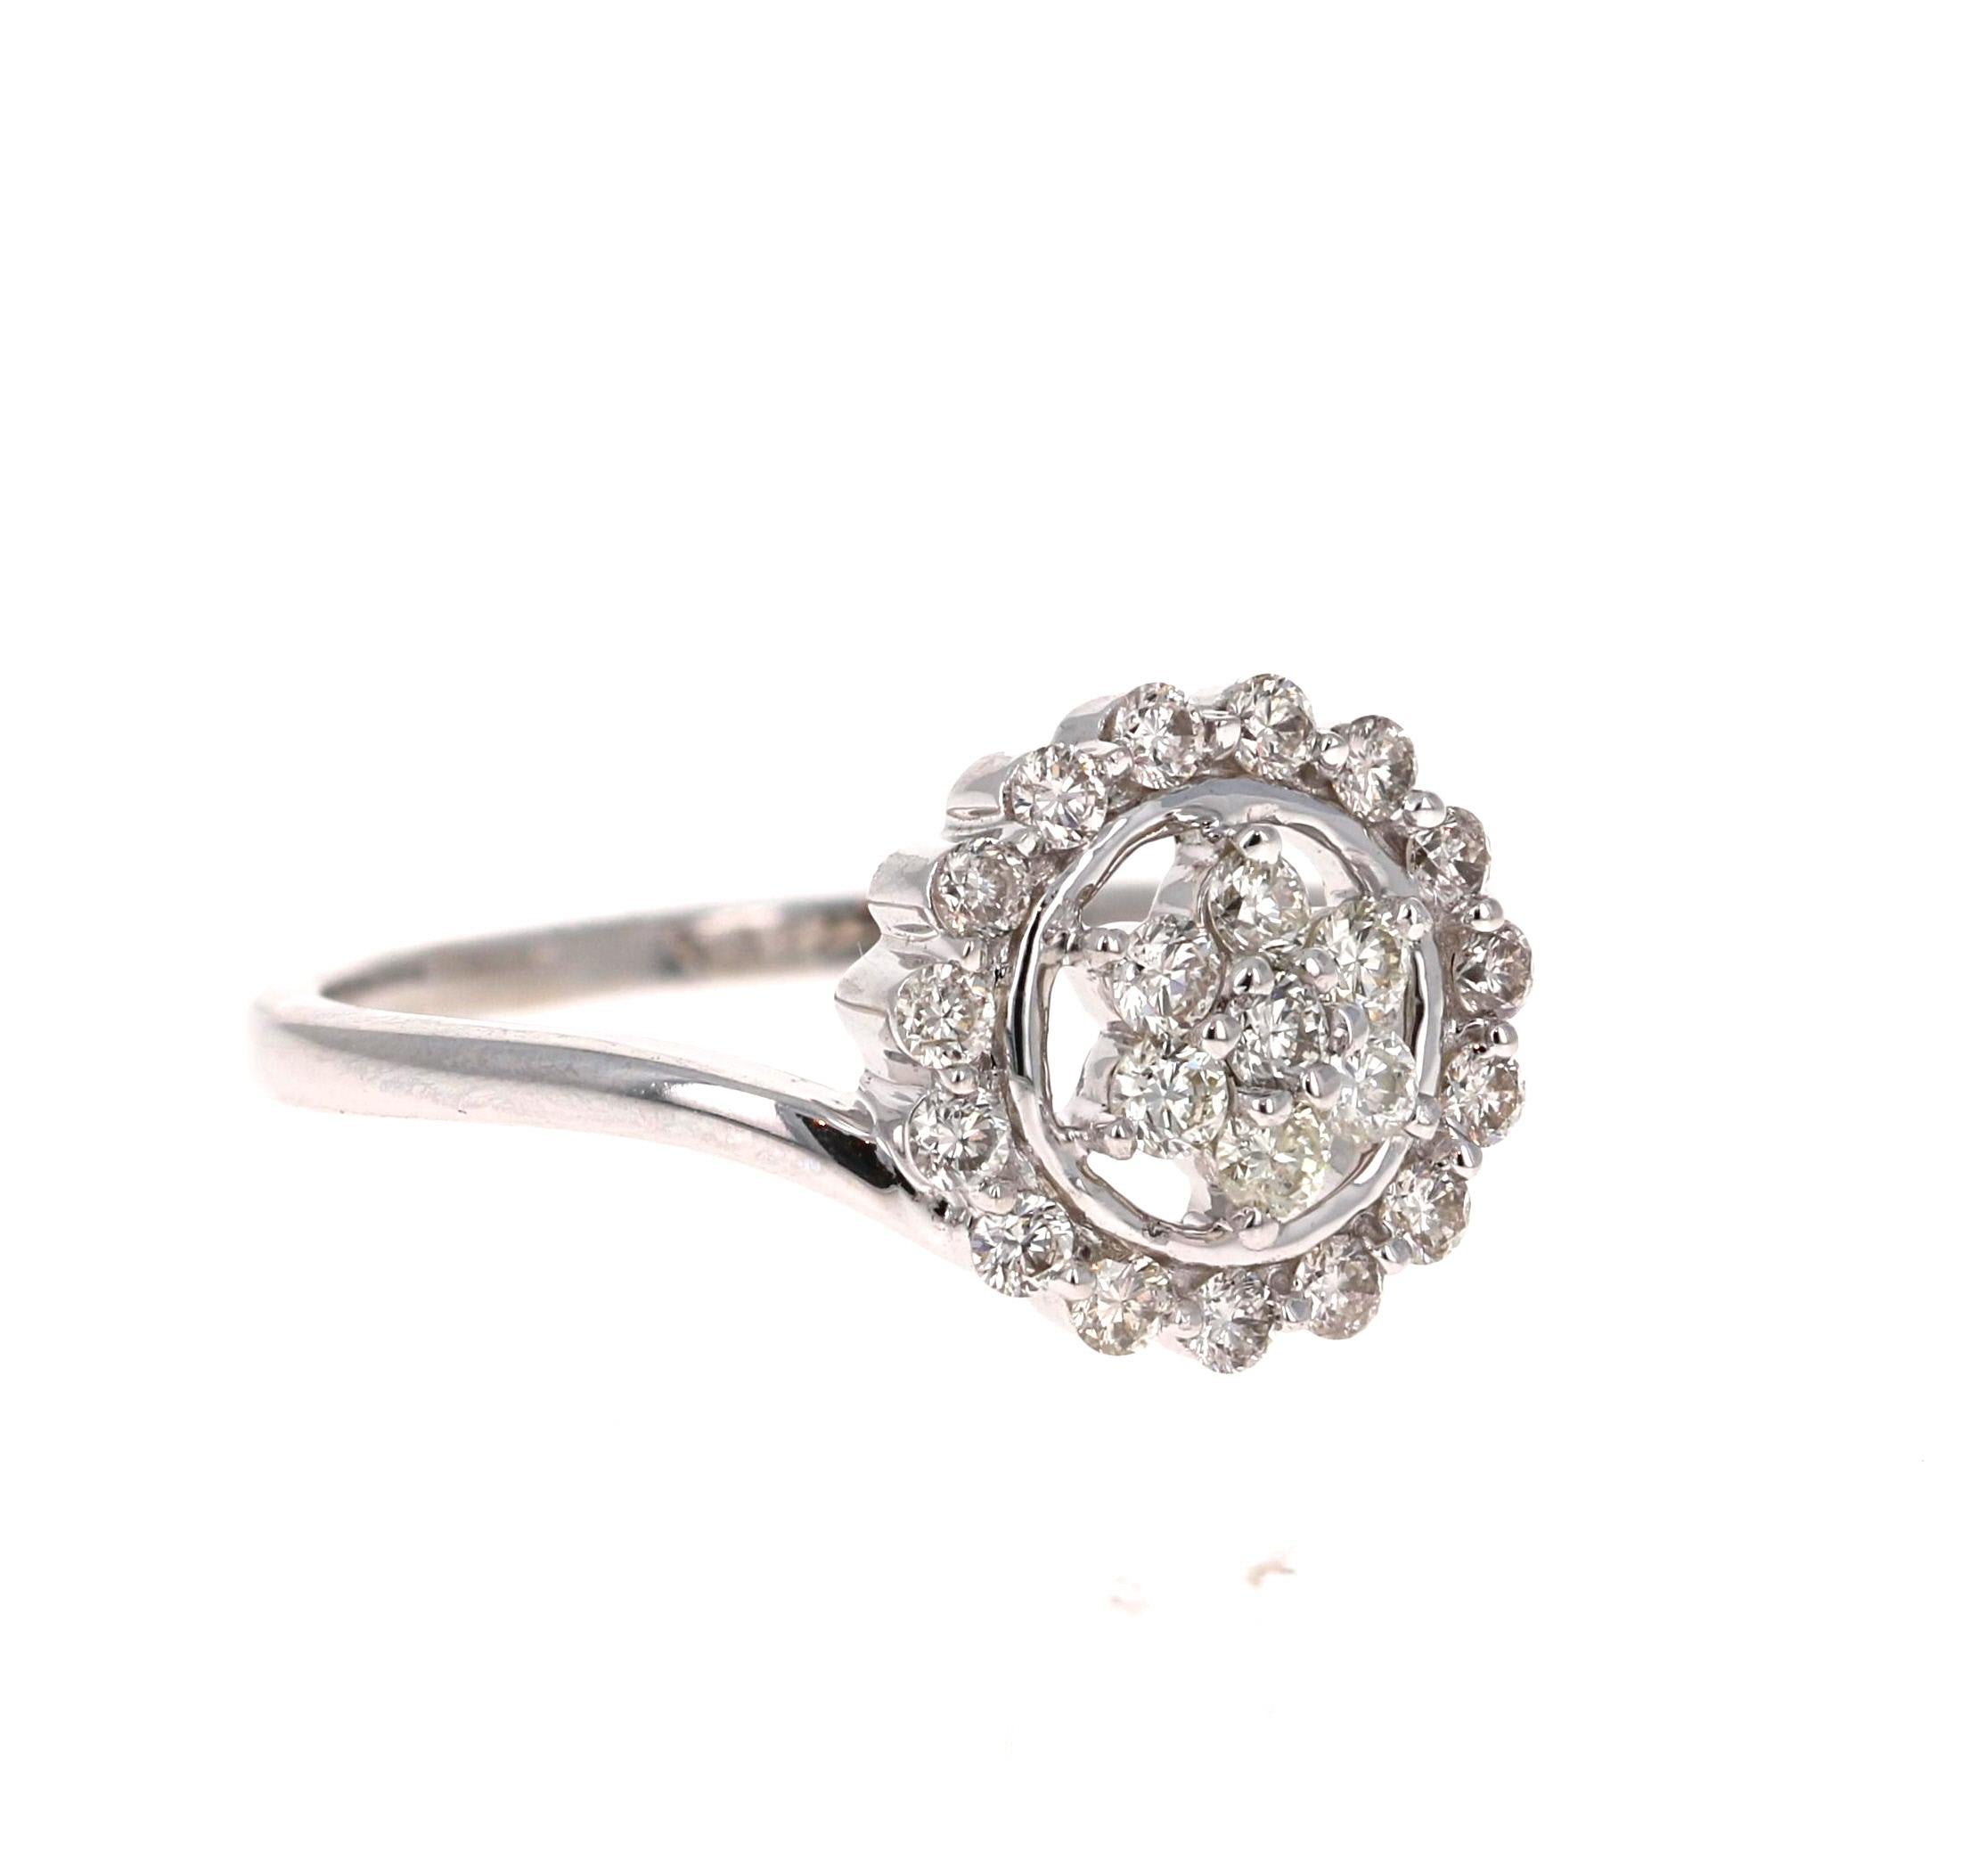 An affordable alternative to an Engagement or Promise Ring!!

This unique Cluster ring has 22 Round Cut Diamonds that weigh 0.49 Carats.  The Cluster setting makes the center Diamond look well over a carat.   The Clarity is VS2 and the Color is